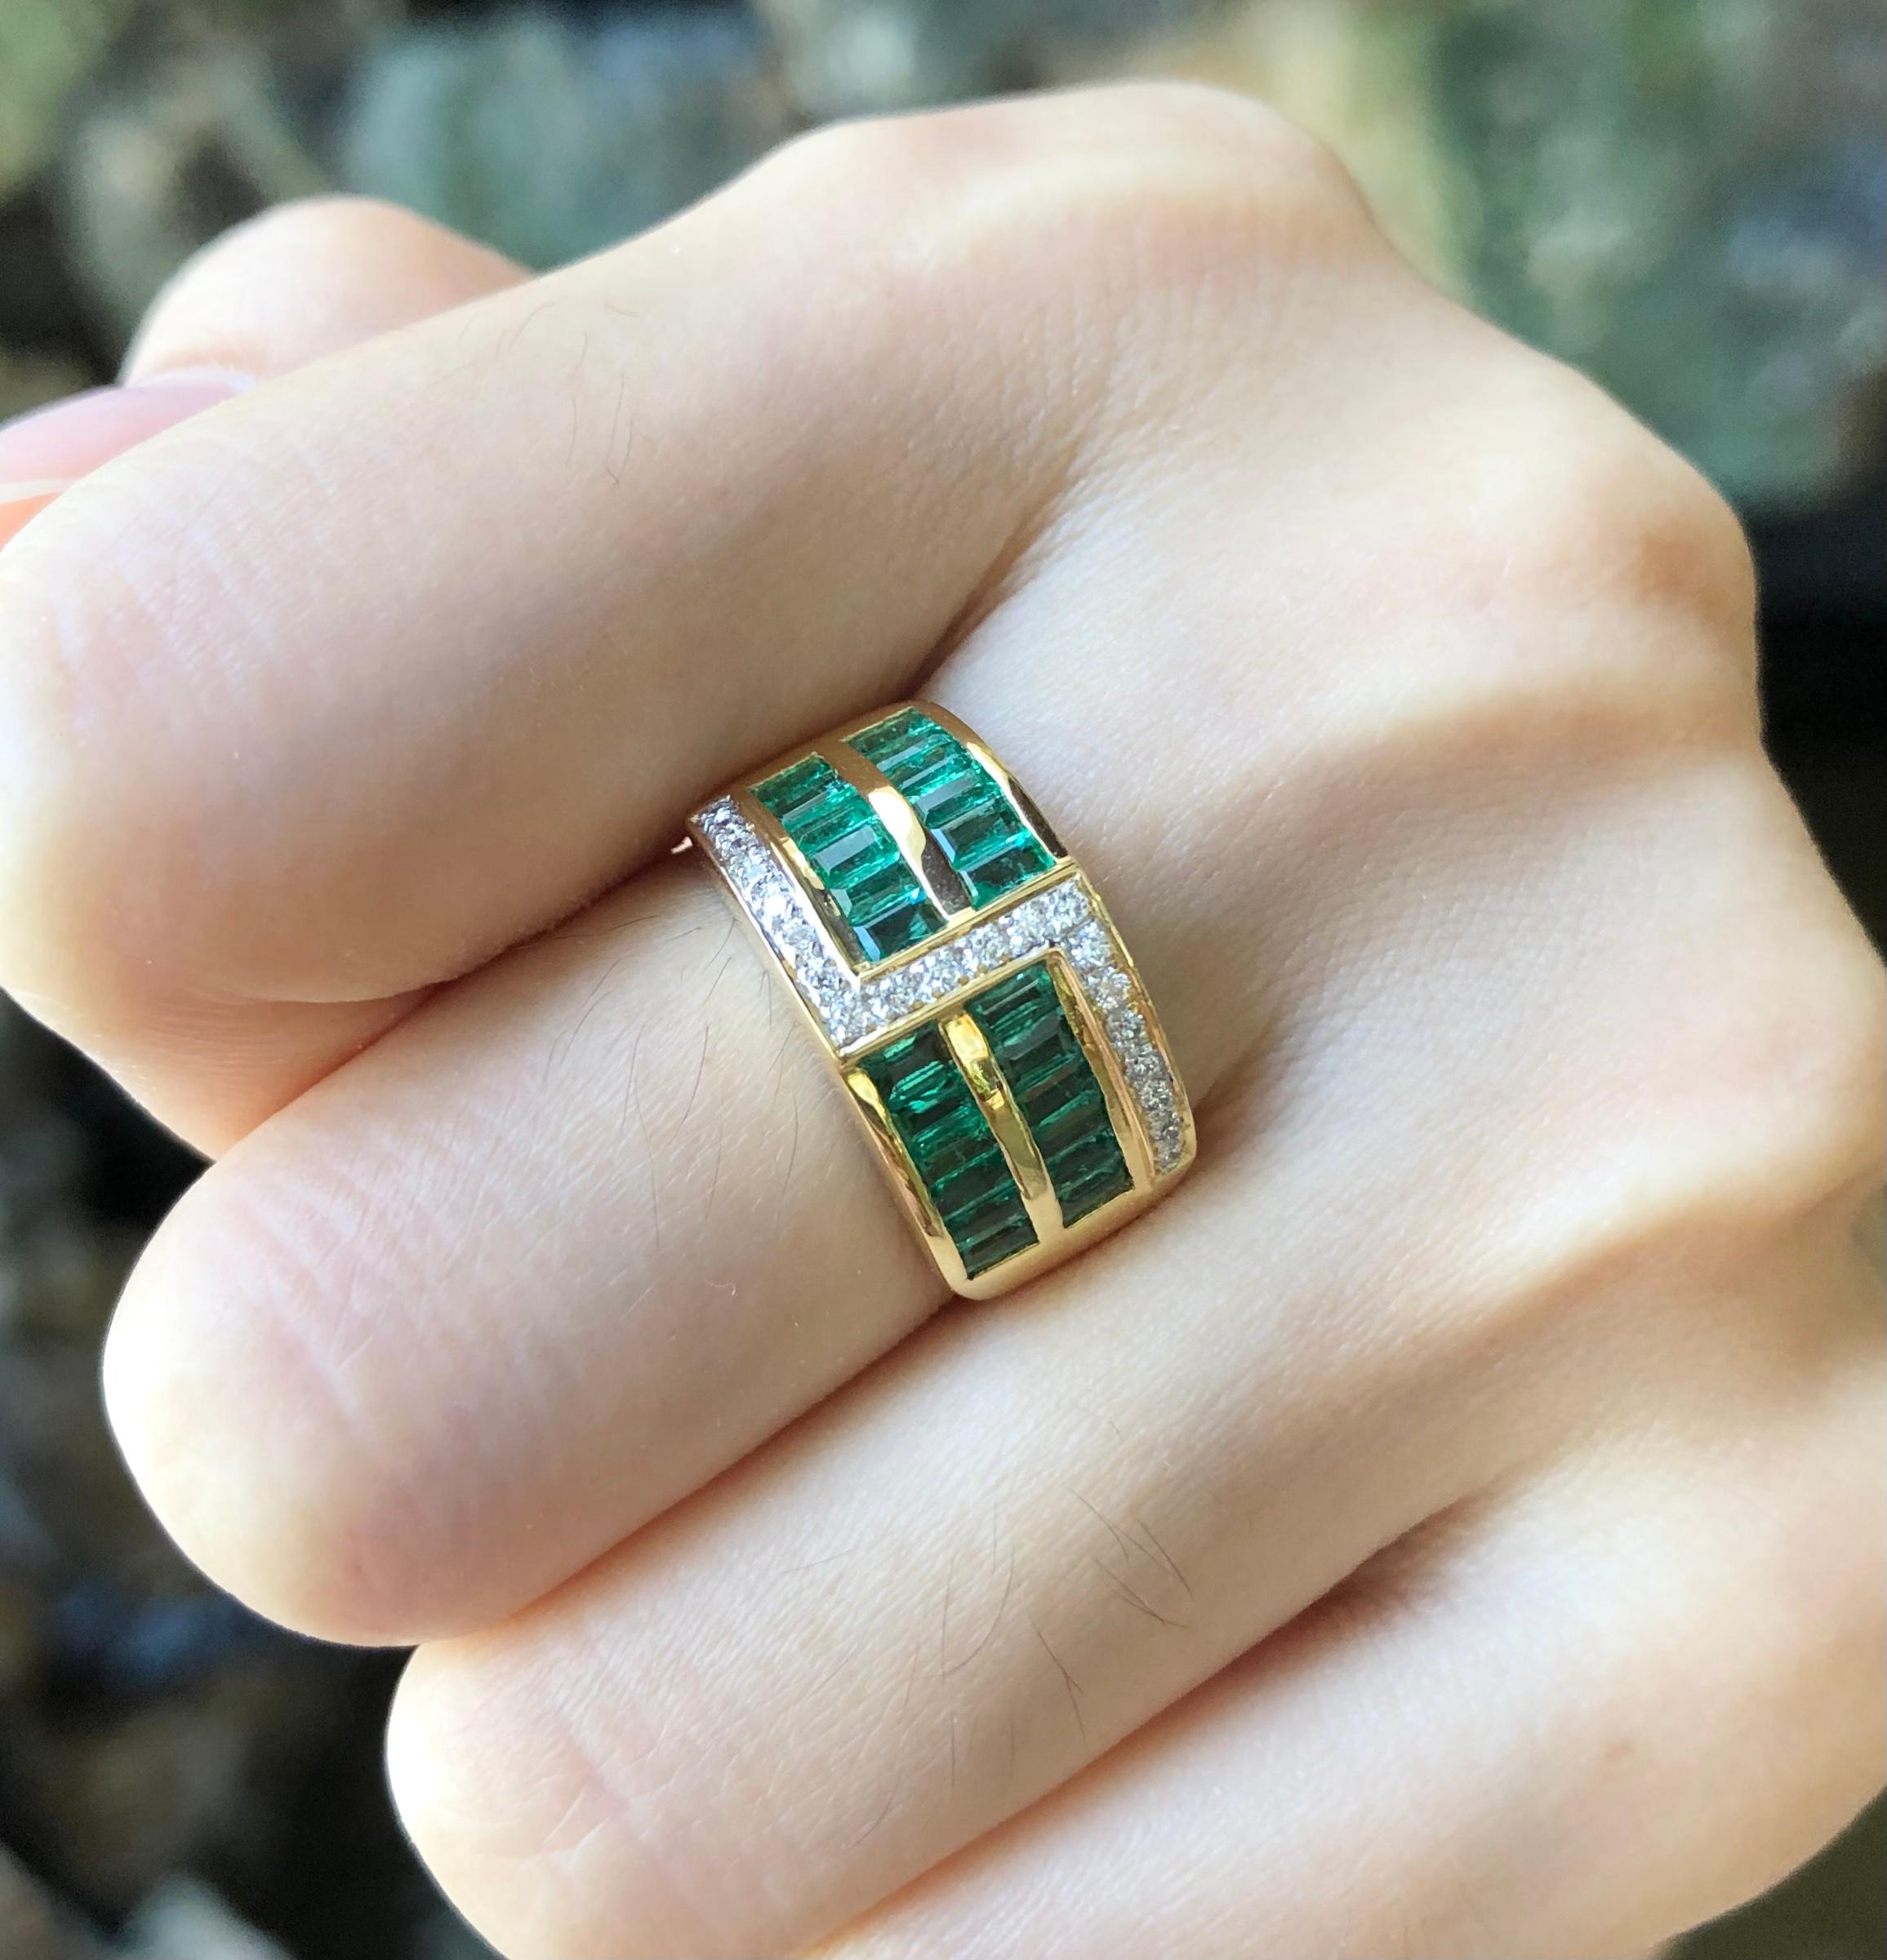 Emerald 1.17 carats with Diamond 0.14 carat Ring set in 18 Karat Gold Settings

Width:  1.8 cm 
Length: 1.0 cm
Ring Size: 53
Total Weight: 8.29 grams

